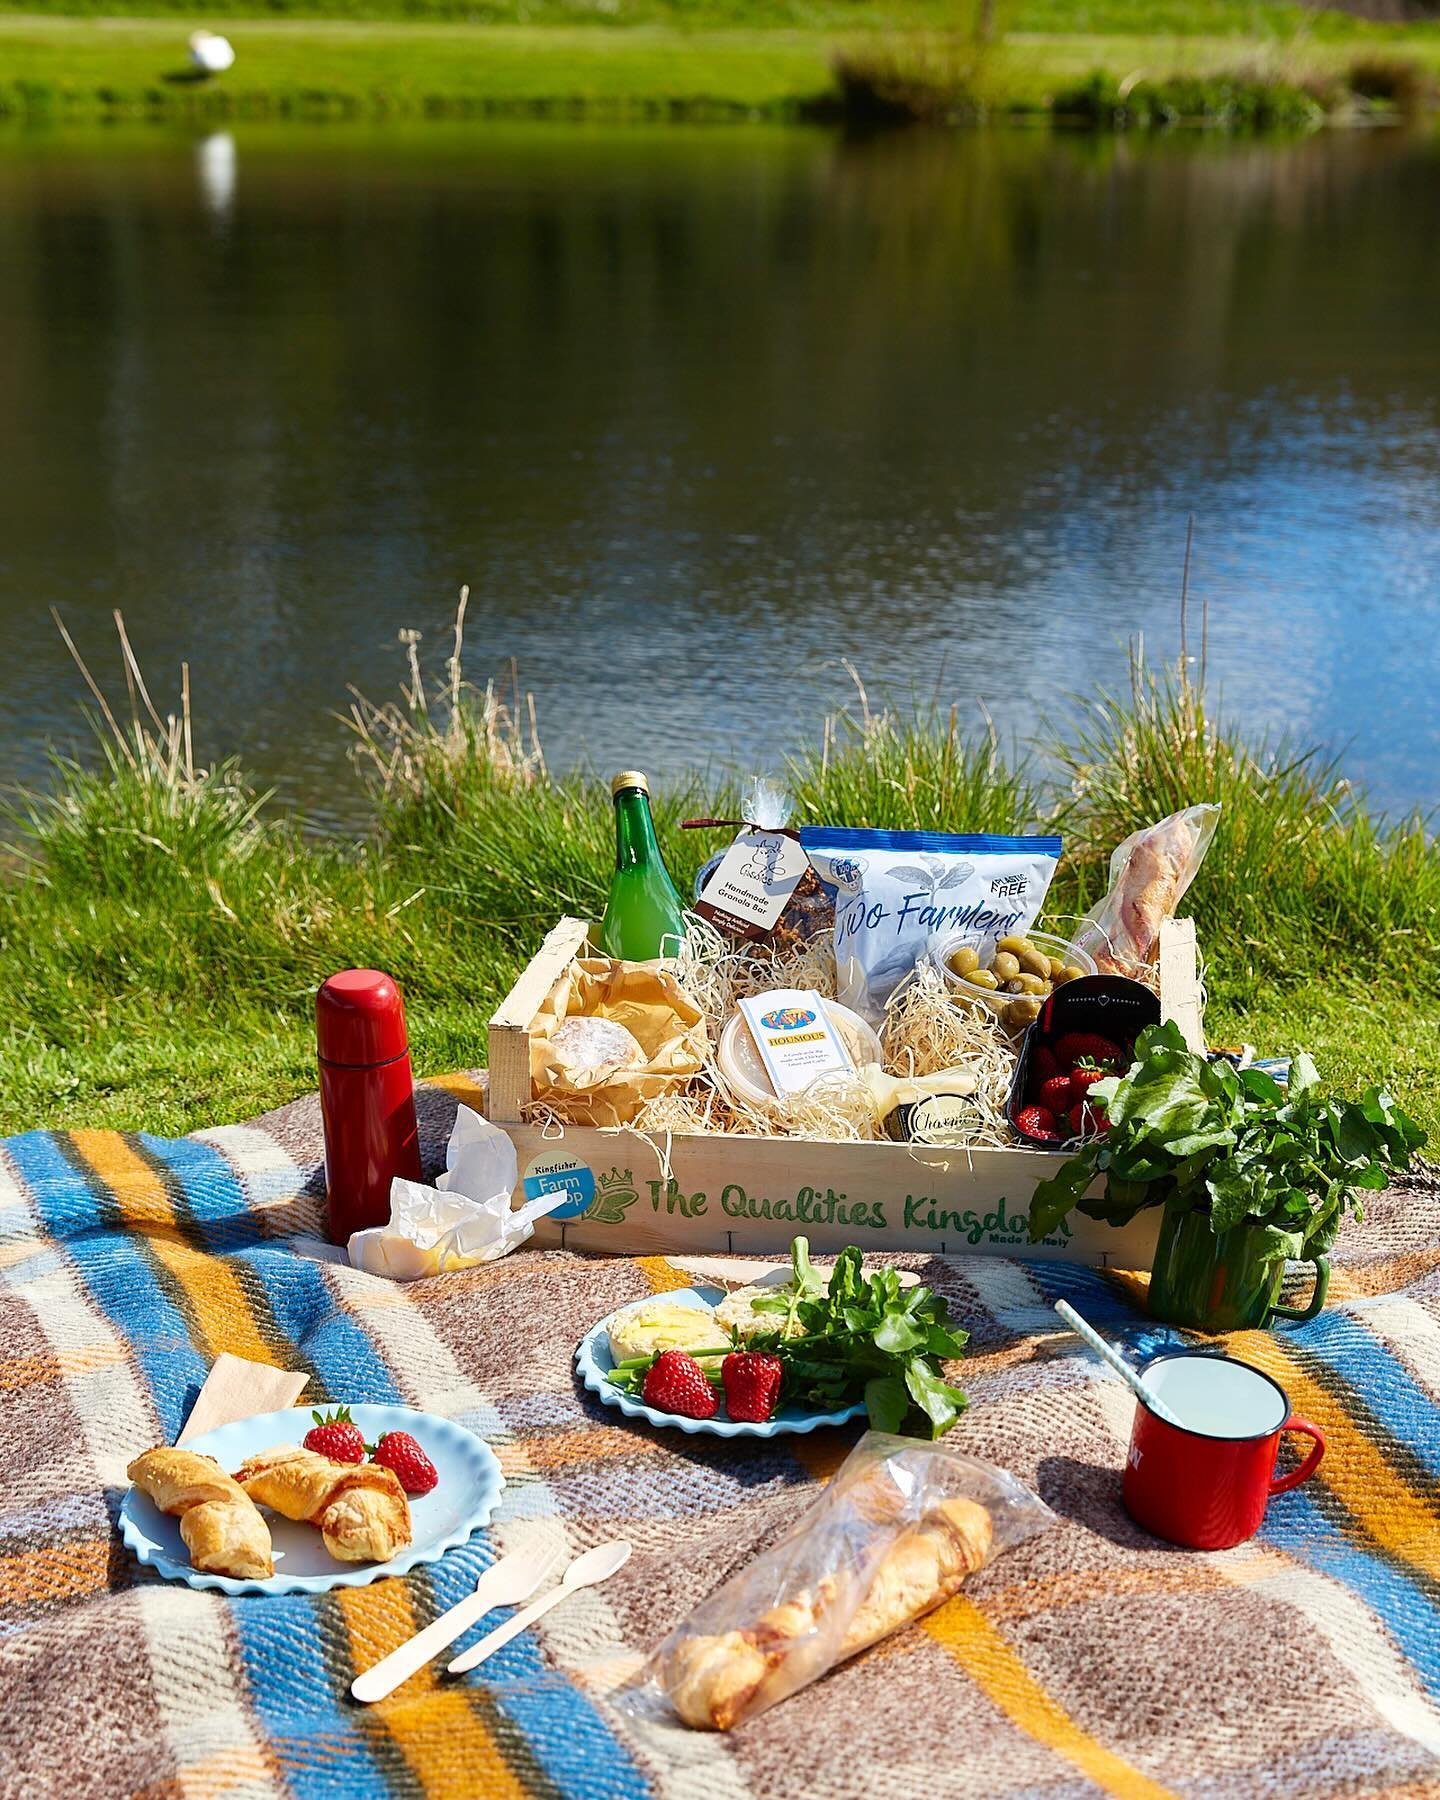 Last chance to book your picnic as part of our celebrations next weekend, Saturday 11 May. 
You can place an order until Monday 6 May.
Pop over to our Surrey Day page on our website to book your picnic now! 

Come and join us to celebrate #surreyday 